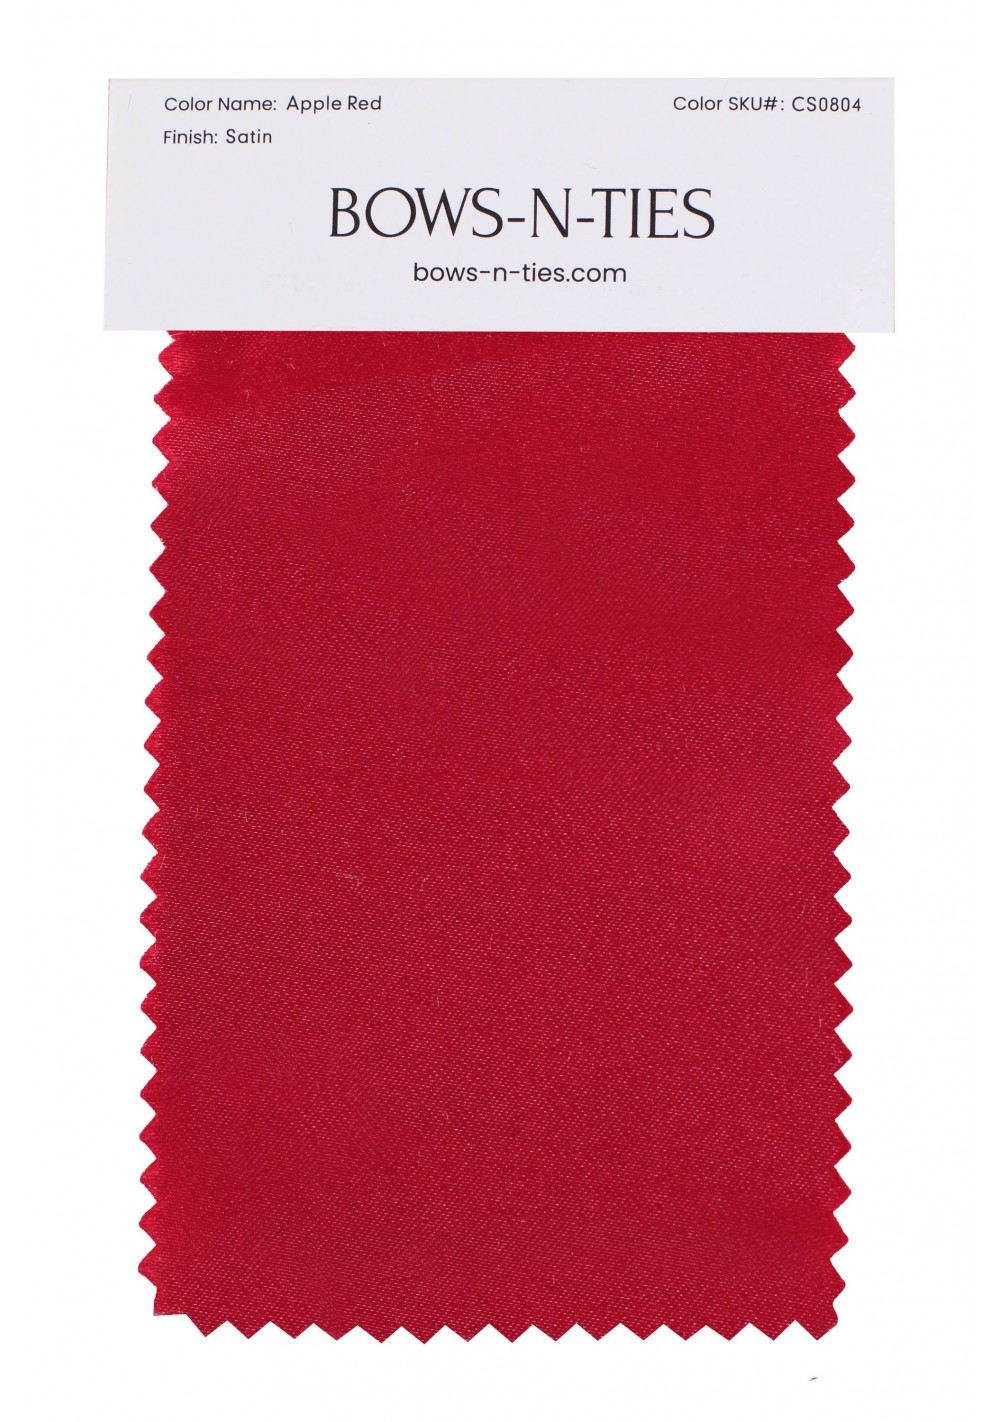 Red Satin Fabric Swatch, Apple Red Fabric Swatch for Men's Wedding Ties  and Accessories